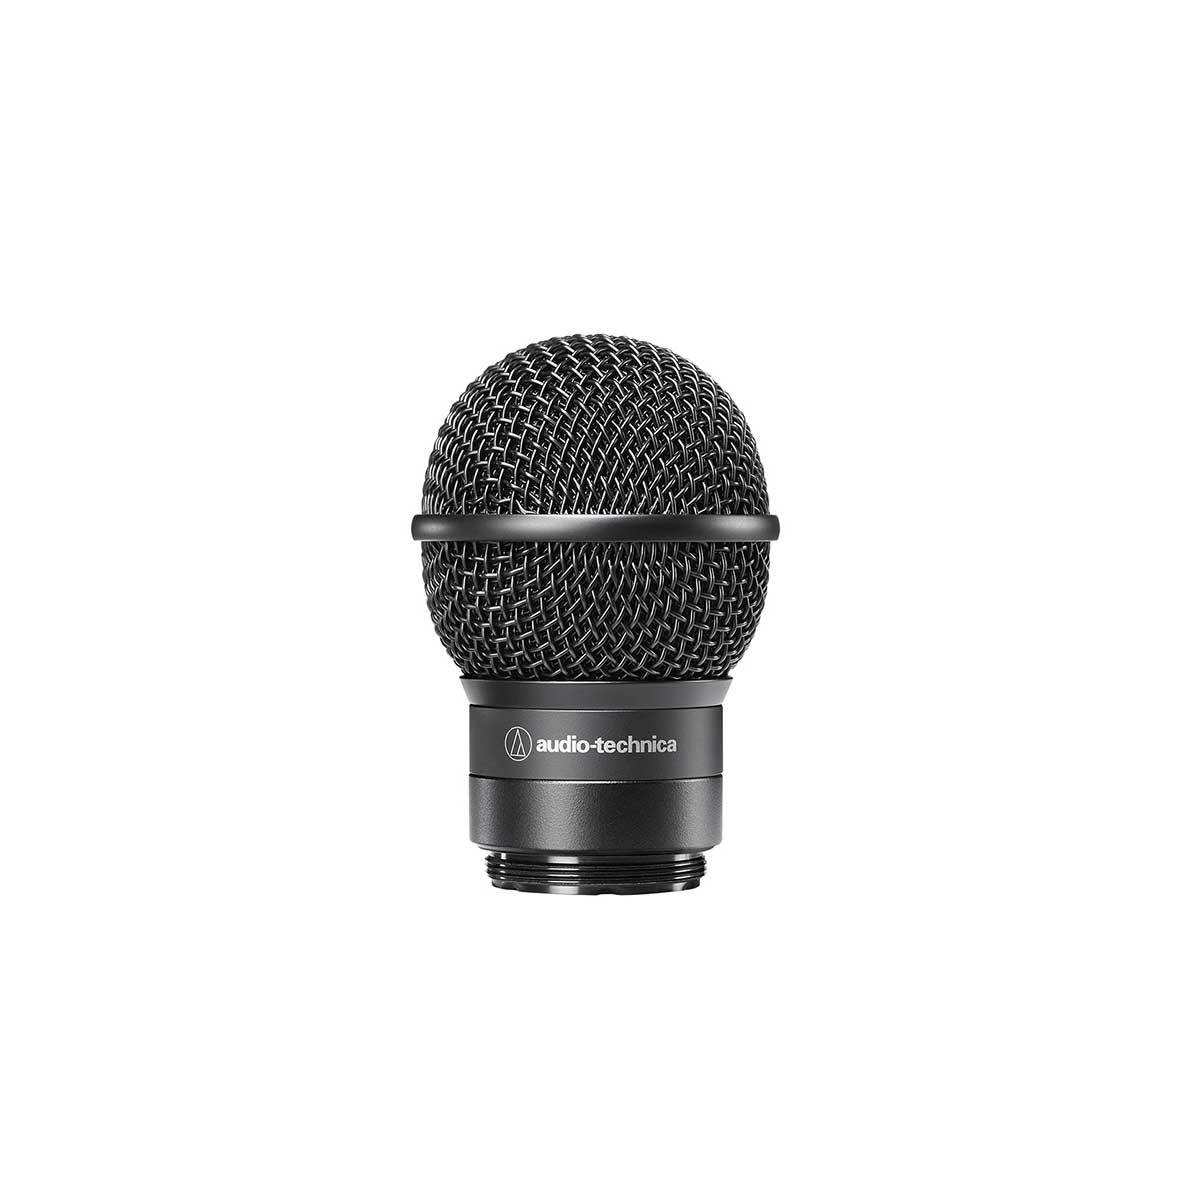 Wireless Systems - Audio-Technica ATW-C510 Interchangeable Cardioid Dynamic Microphone Capsule